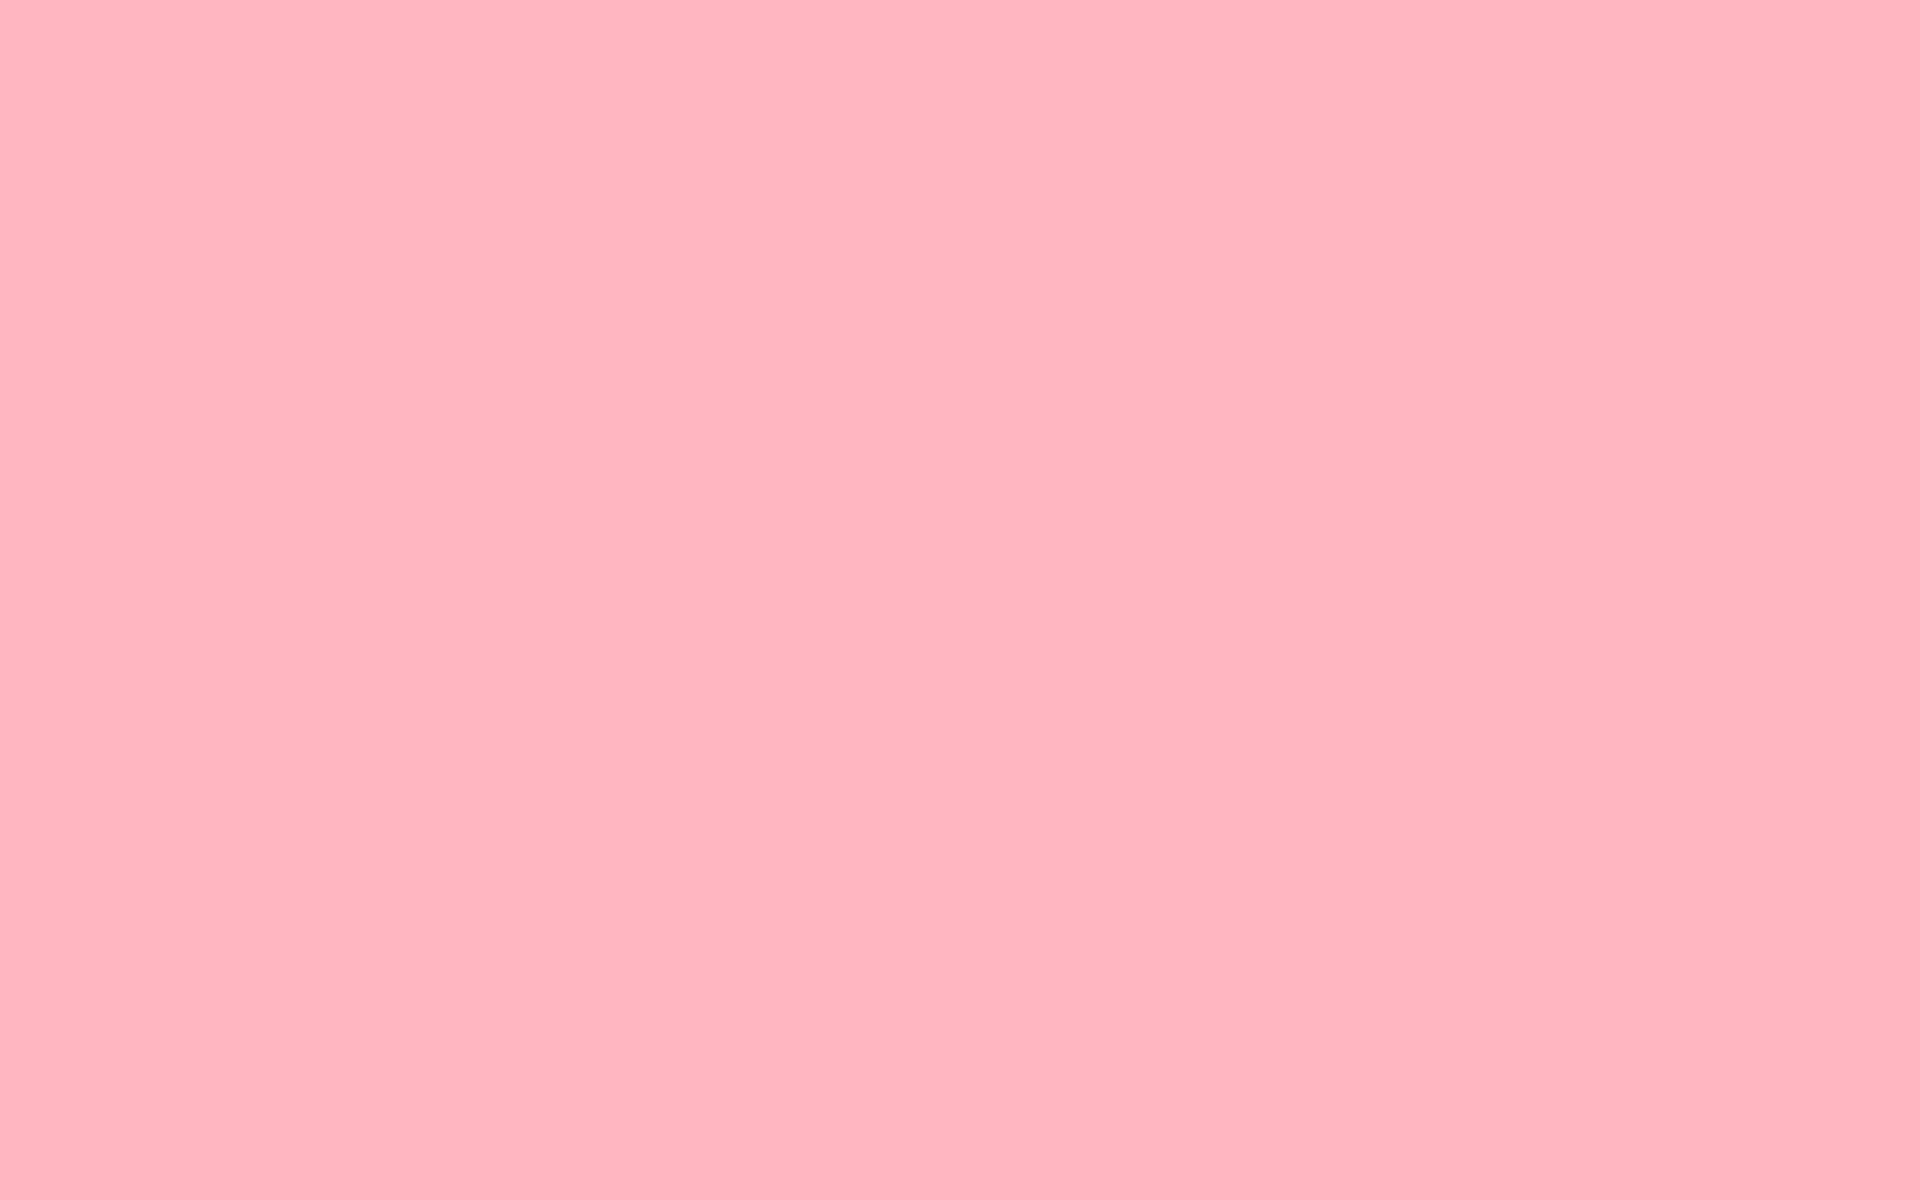 Free 1920x1200 resolution Light Pink solid color background view and